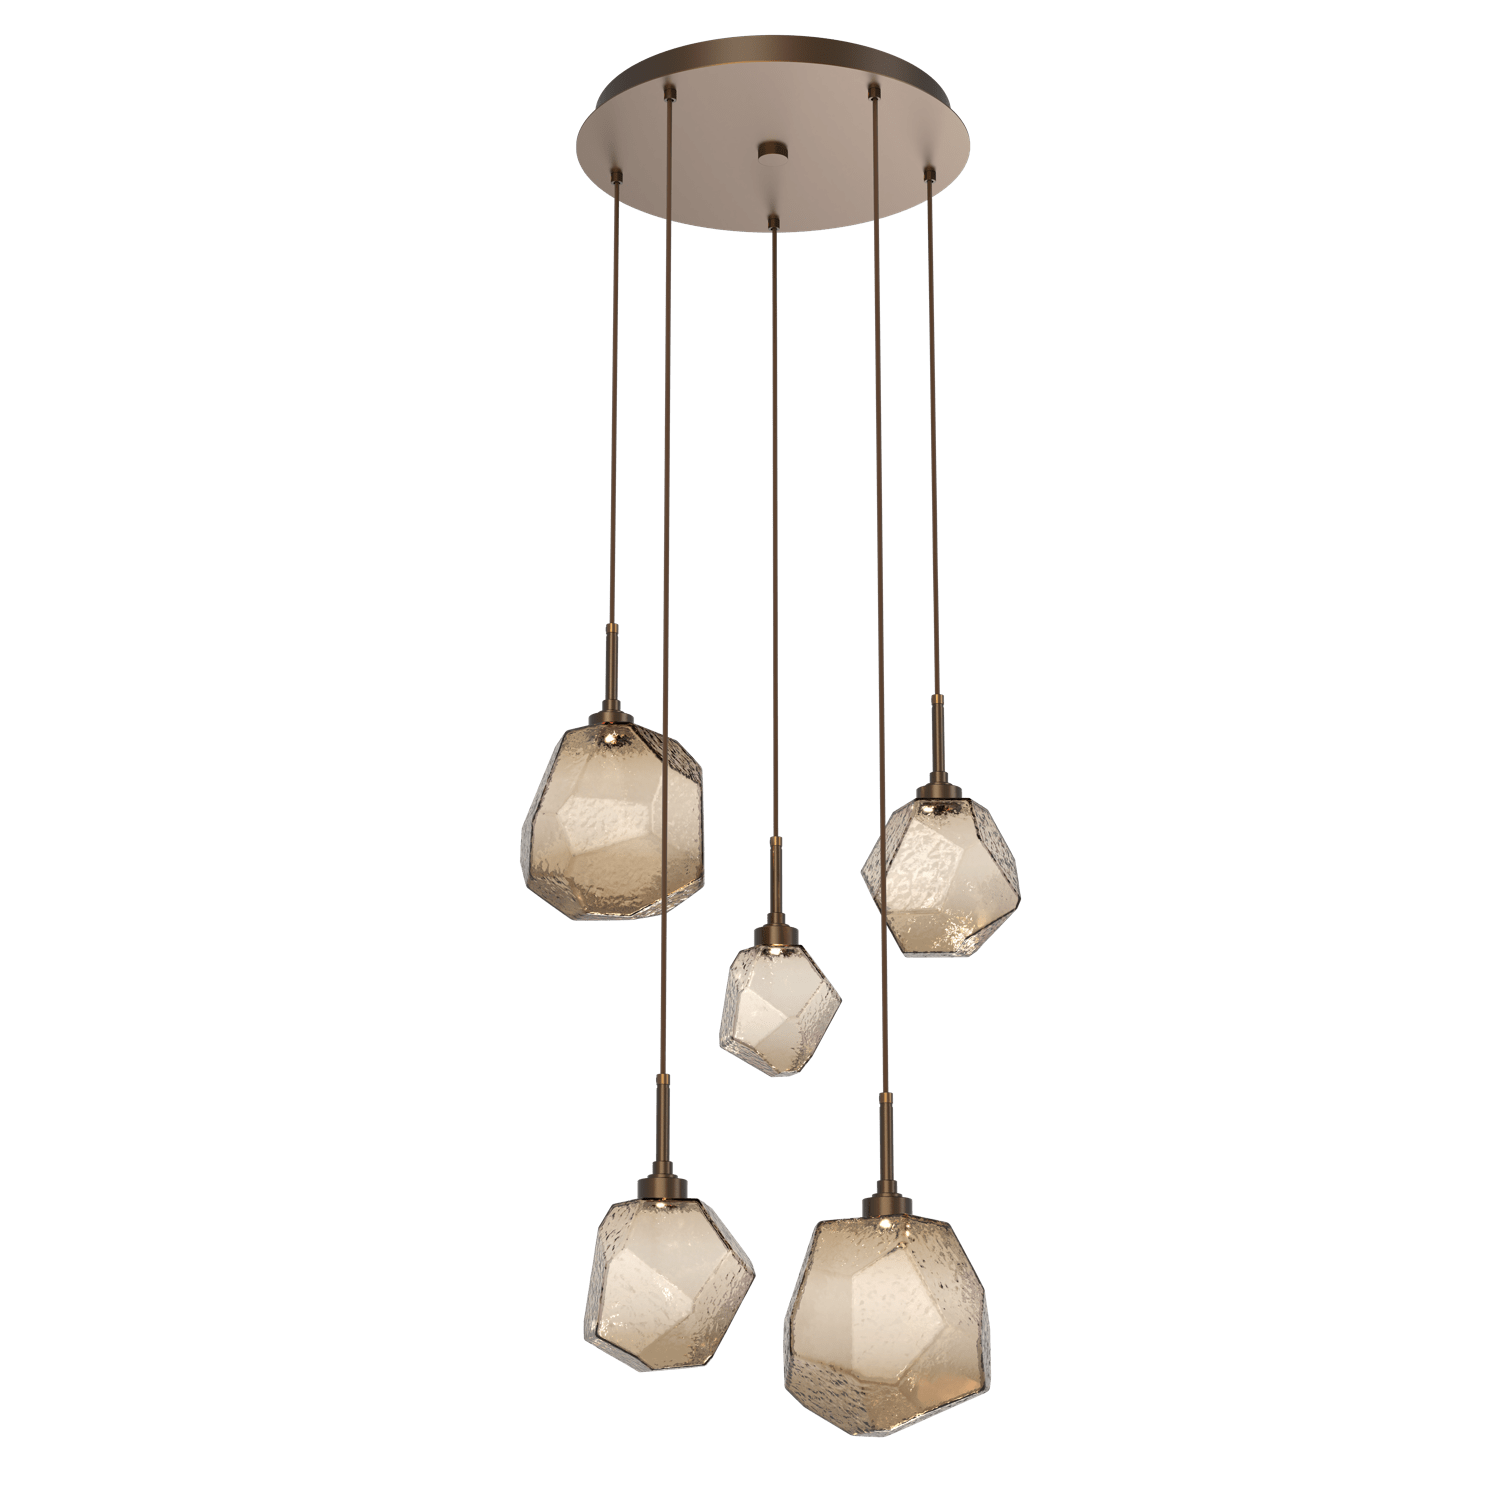 CHB0039-05-FB-B-Hammerton-Studio-Gem-5-light-round-pendant-chandelier-with-flat-bronze-finish-and-bronze-blown-glass-shades-and-LED-lamping